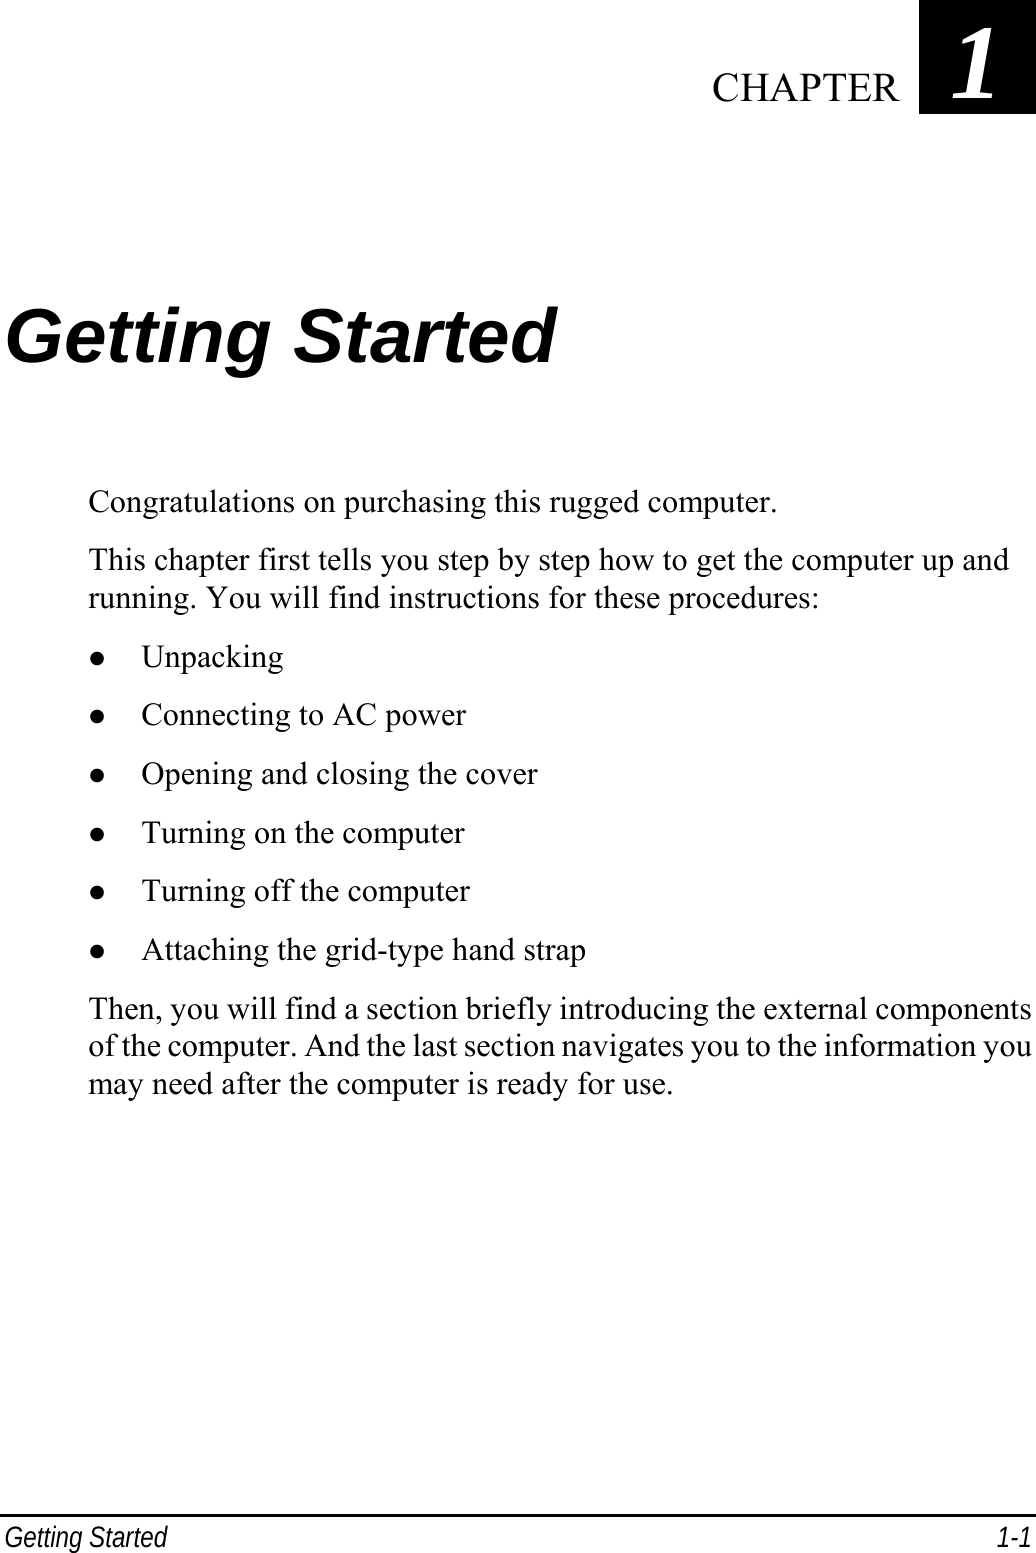  Getting Started  1-1 Chapter   1 Getting Started Congratulations on purchasing this rugged computer. This chapter first tells you step by step how to get the computer up and running. You will find instructions for these procedures: z Unpacking z Connecting to AC power z Opening and closing the cover z Turning on the computer z Turning off the computer z Attaching the grid-type hand strap Then, you will find a section briefly introducing the external components of the computer. And the last section navigates you to the information you may need after the computer is ready for use.  CHAPTER 